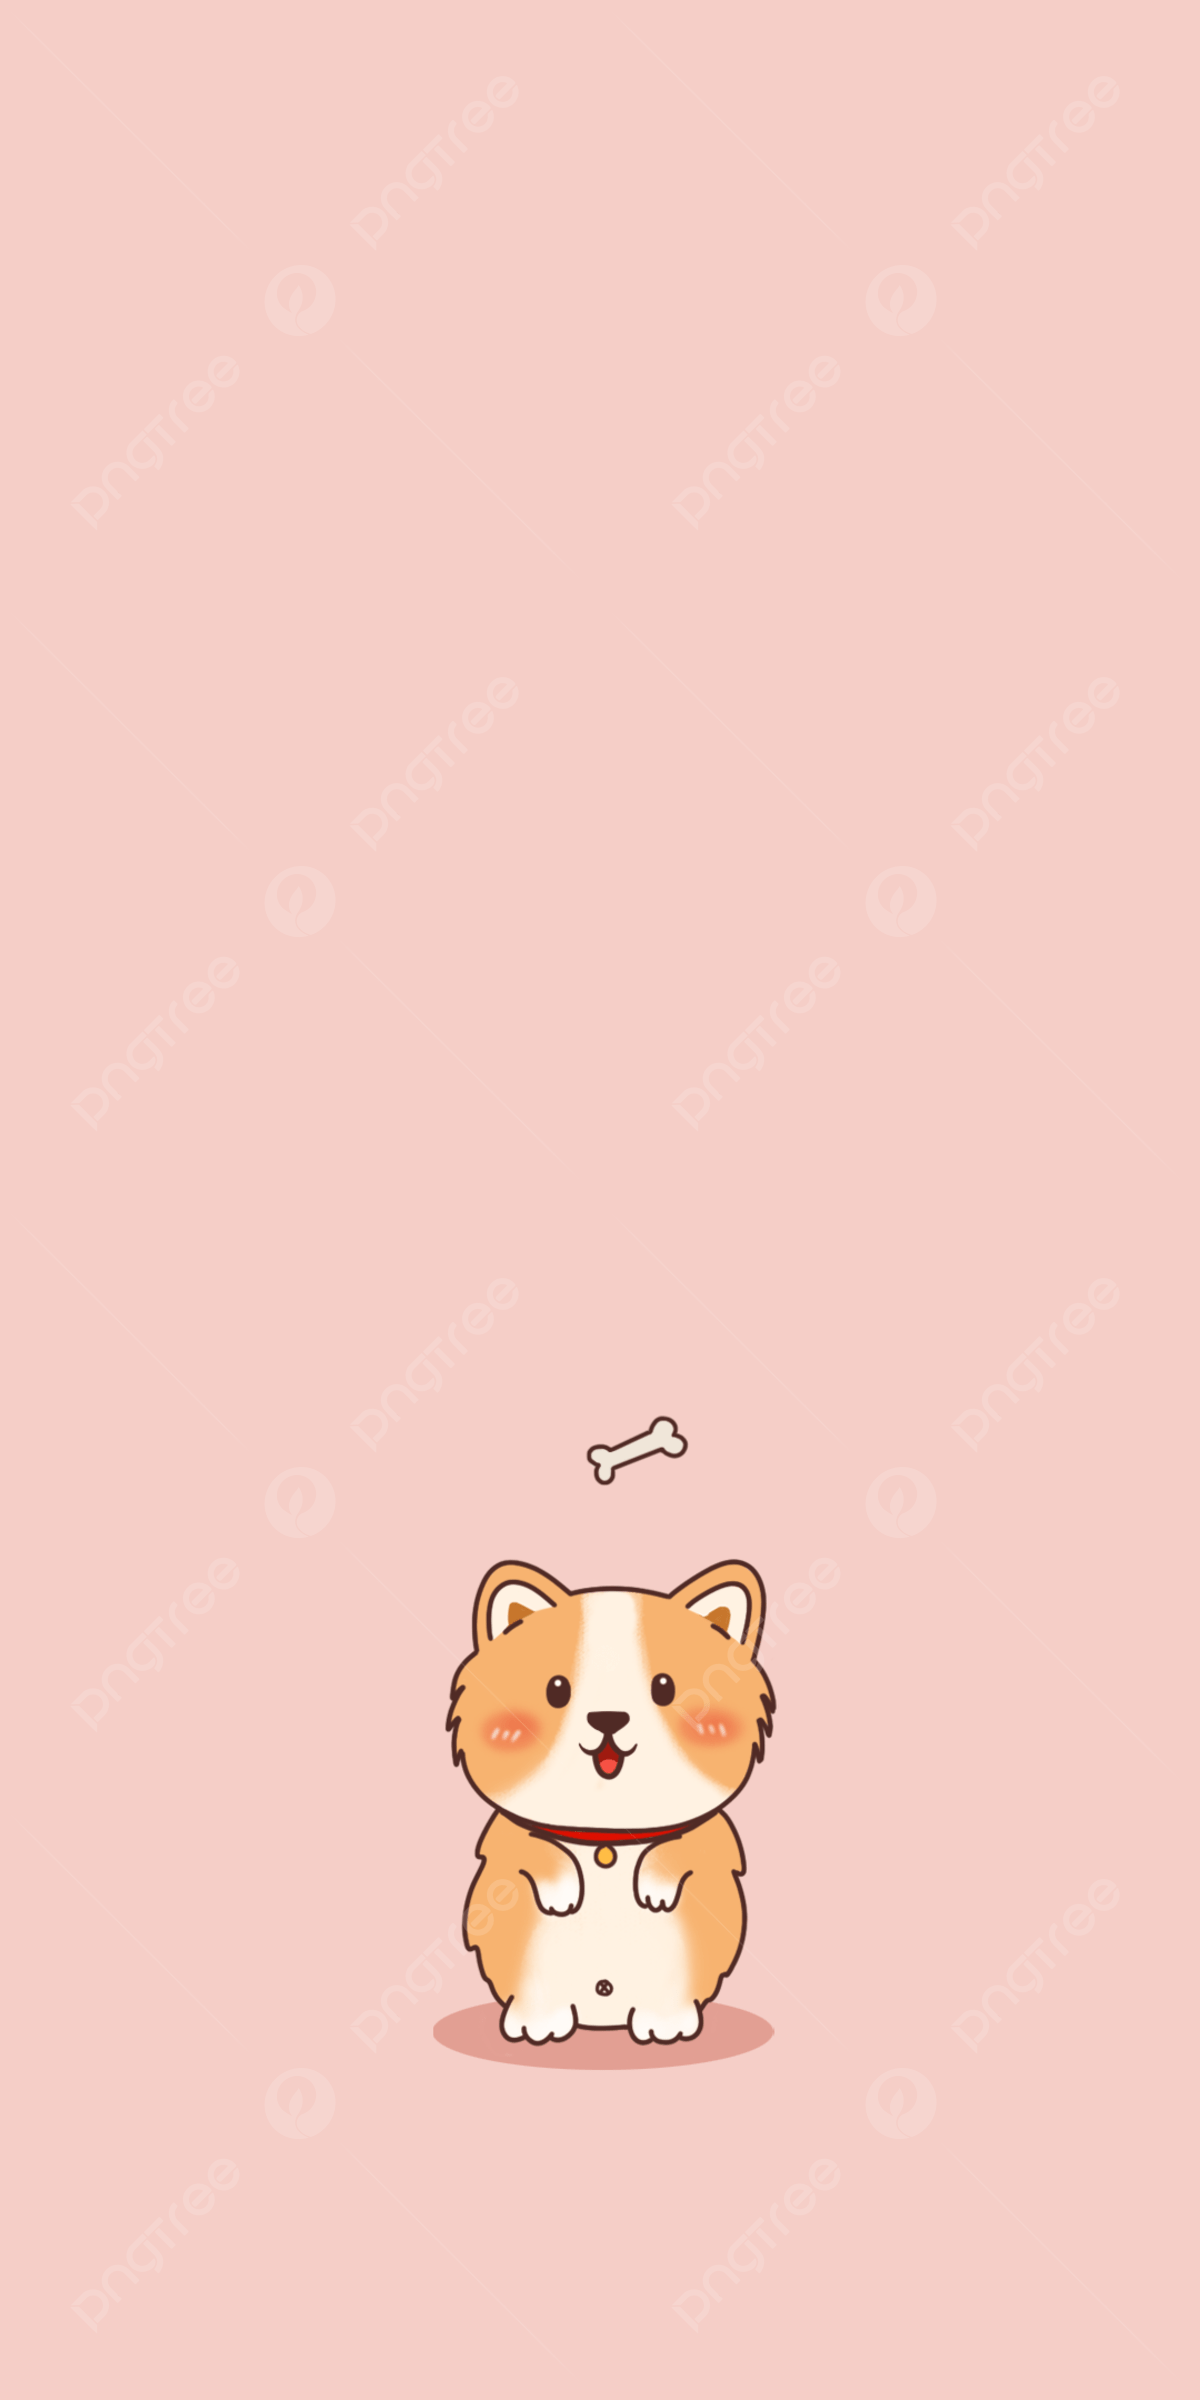 Corgi Theme Mobile Wallpaper Background, Flat, Cute, Pink Background Image for Free Download